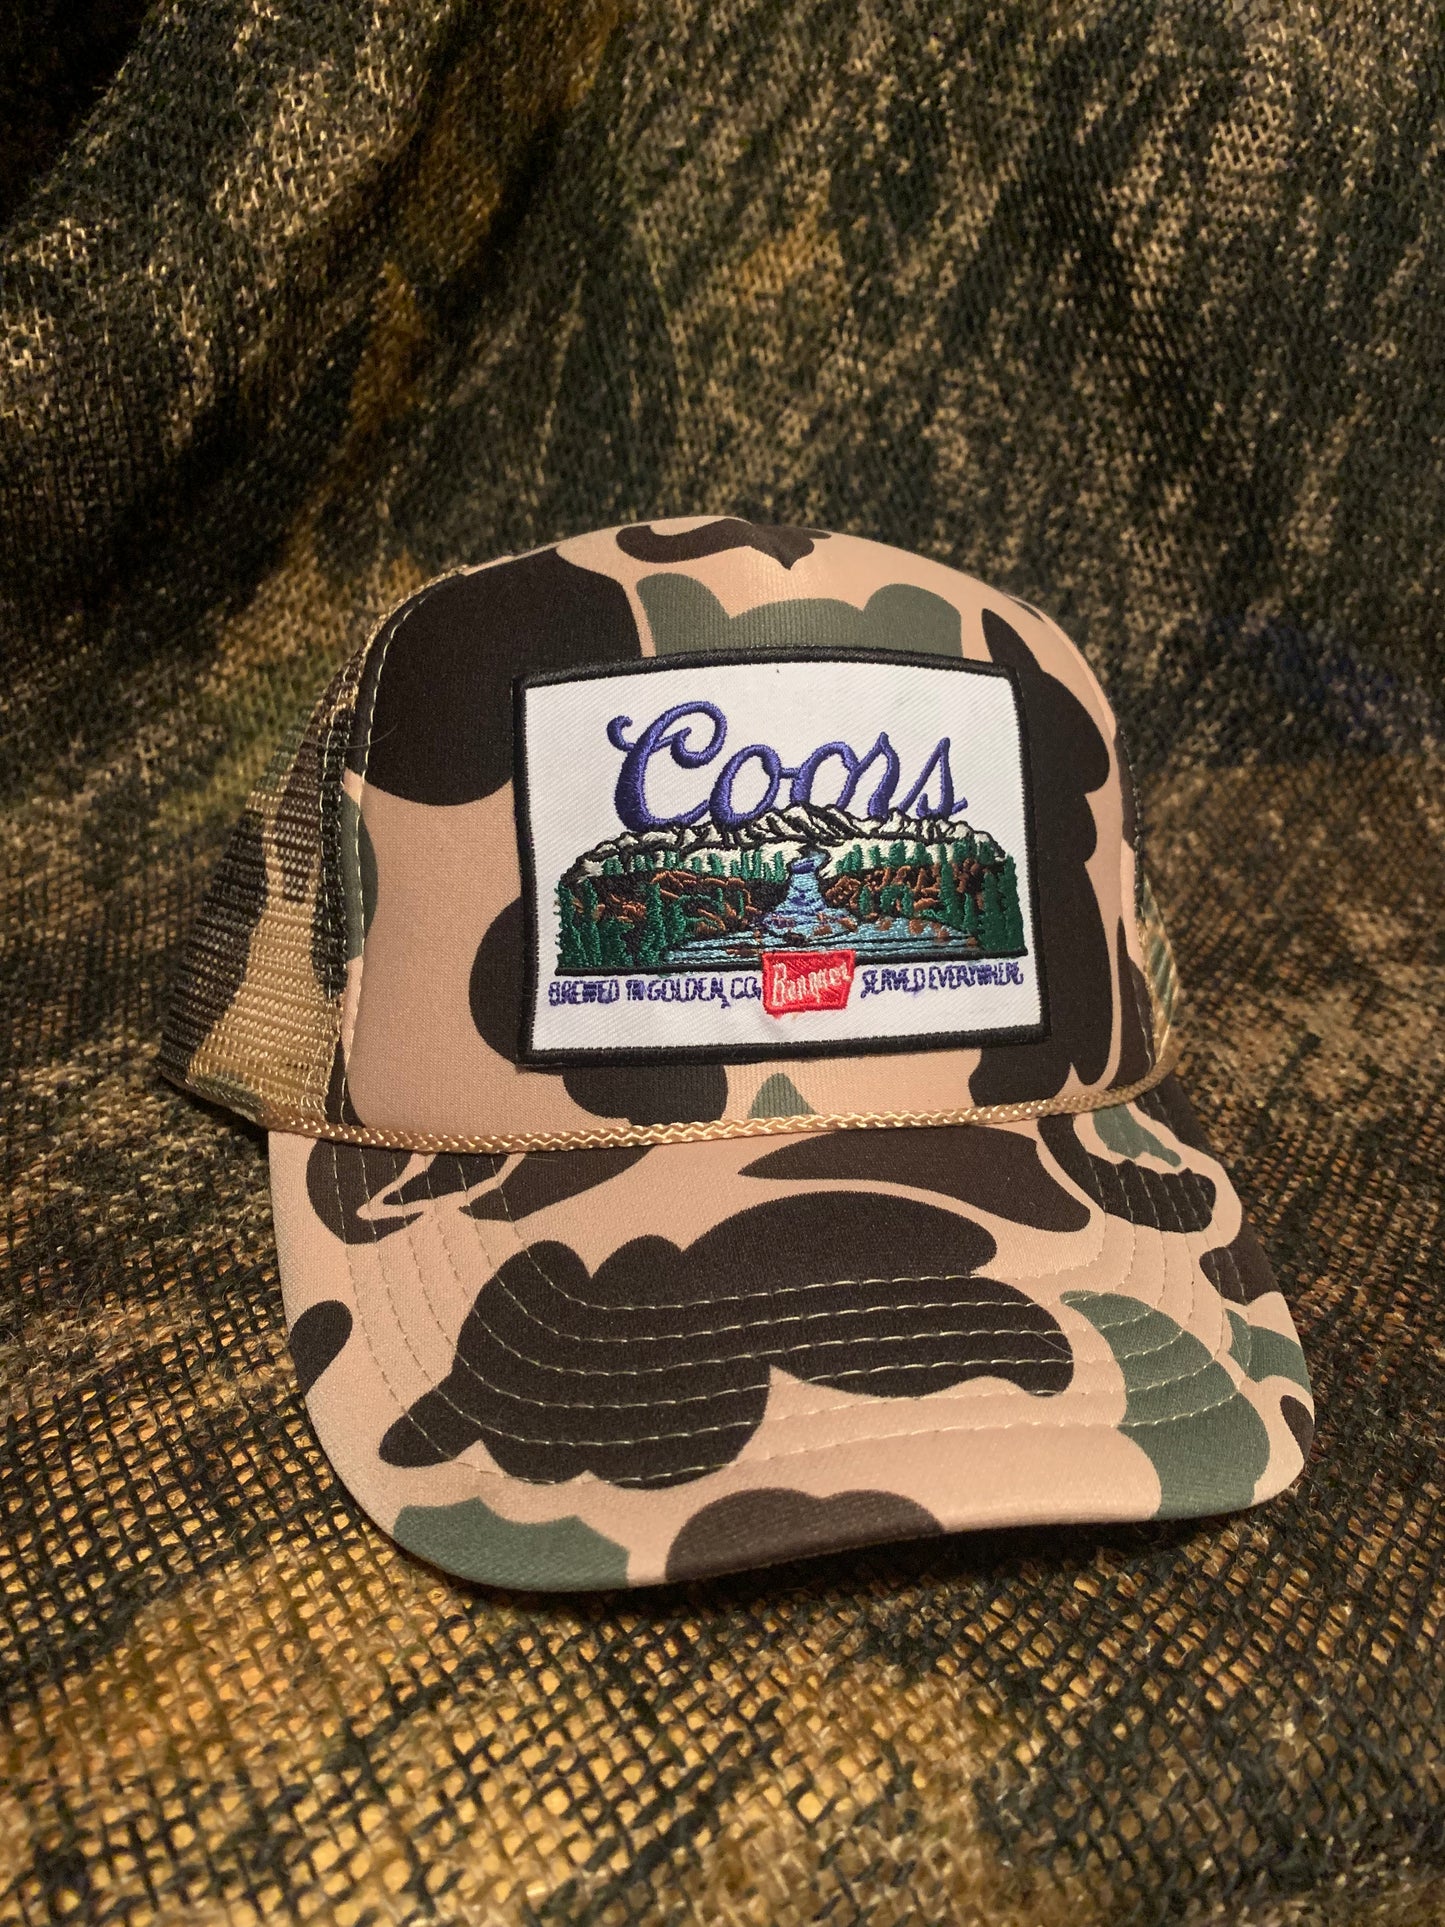 Coors Banquet patch on Camo rope brim snapback